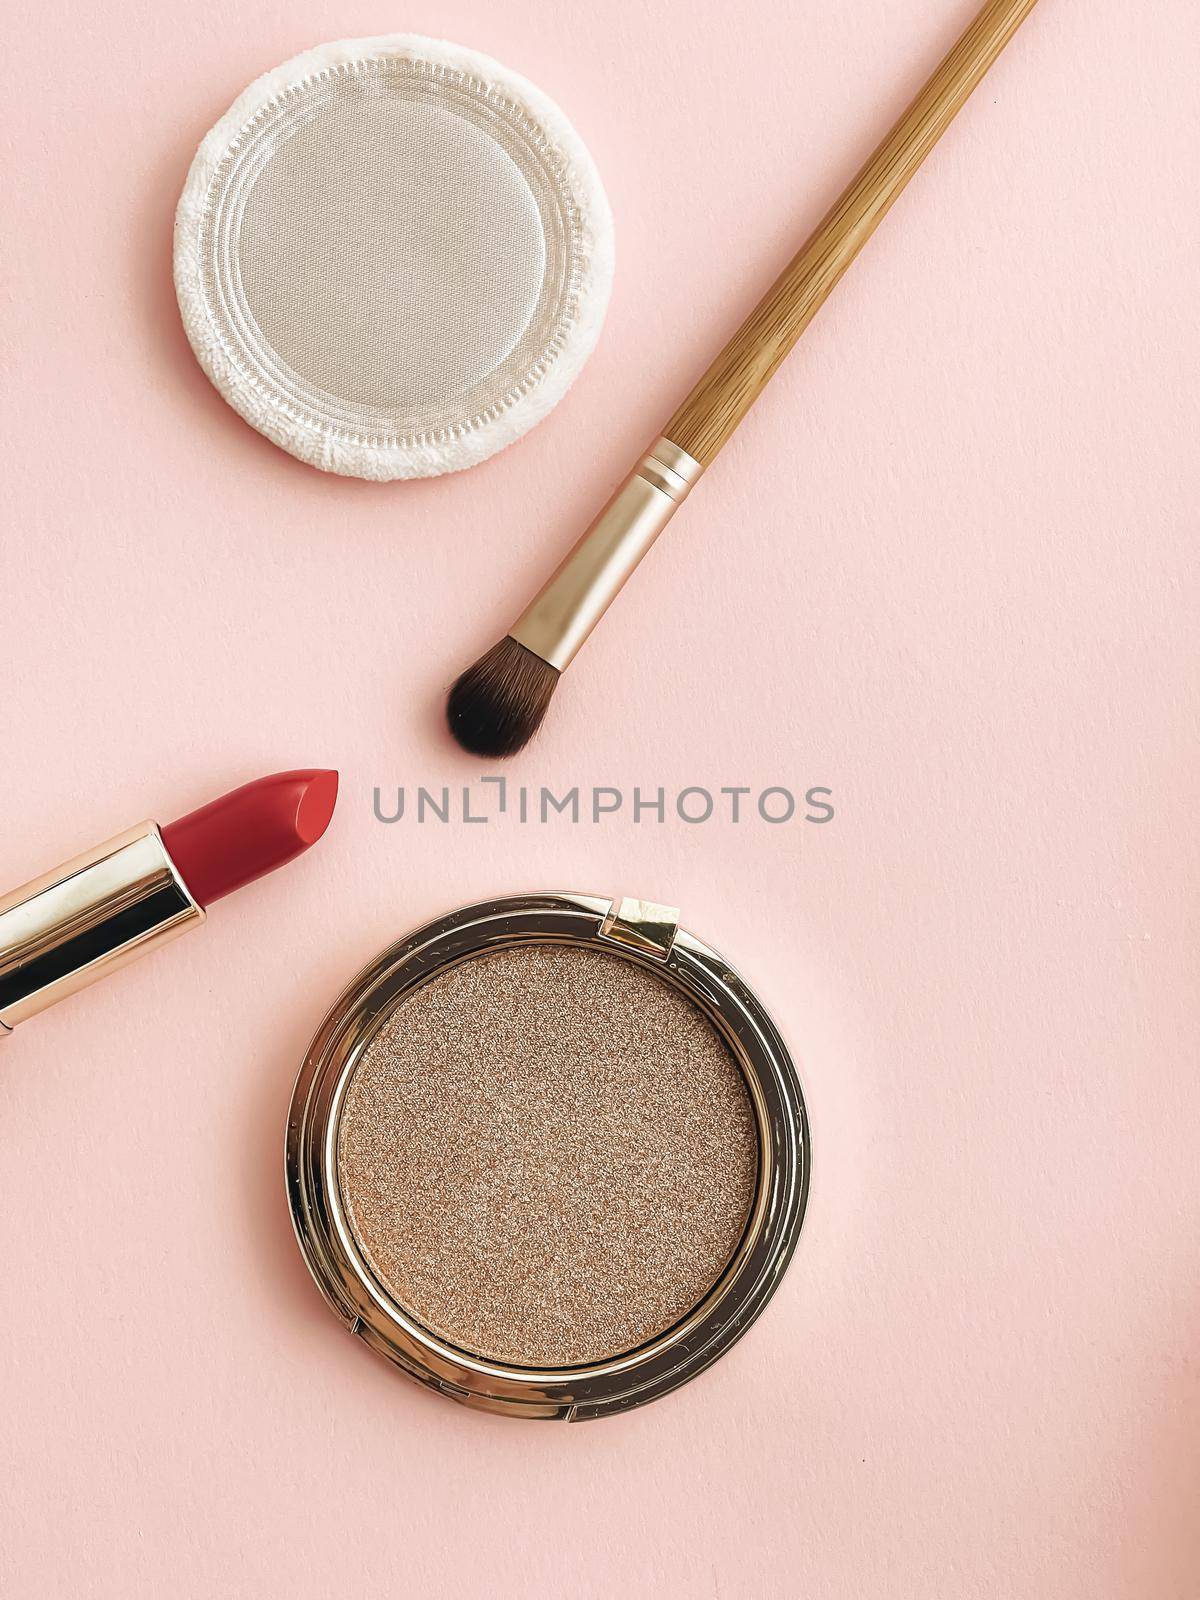 Beauty, make-up and cosmetics flatlay design with copyspace, cosmetic products and makeup tools on peach background, girly and feminine style by Anneleven